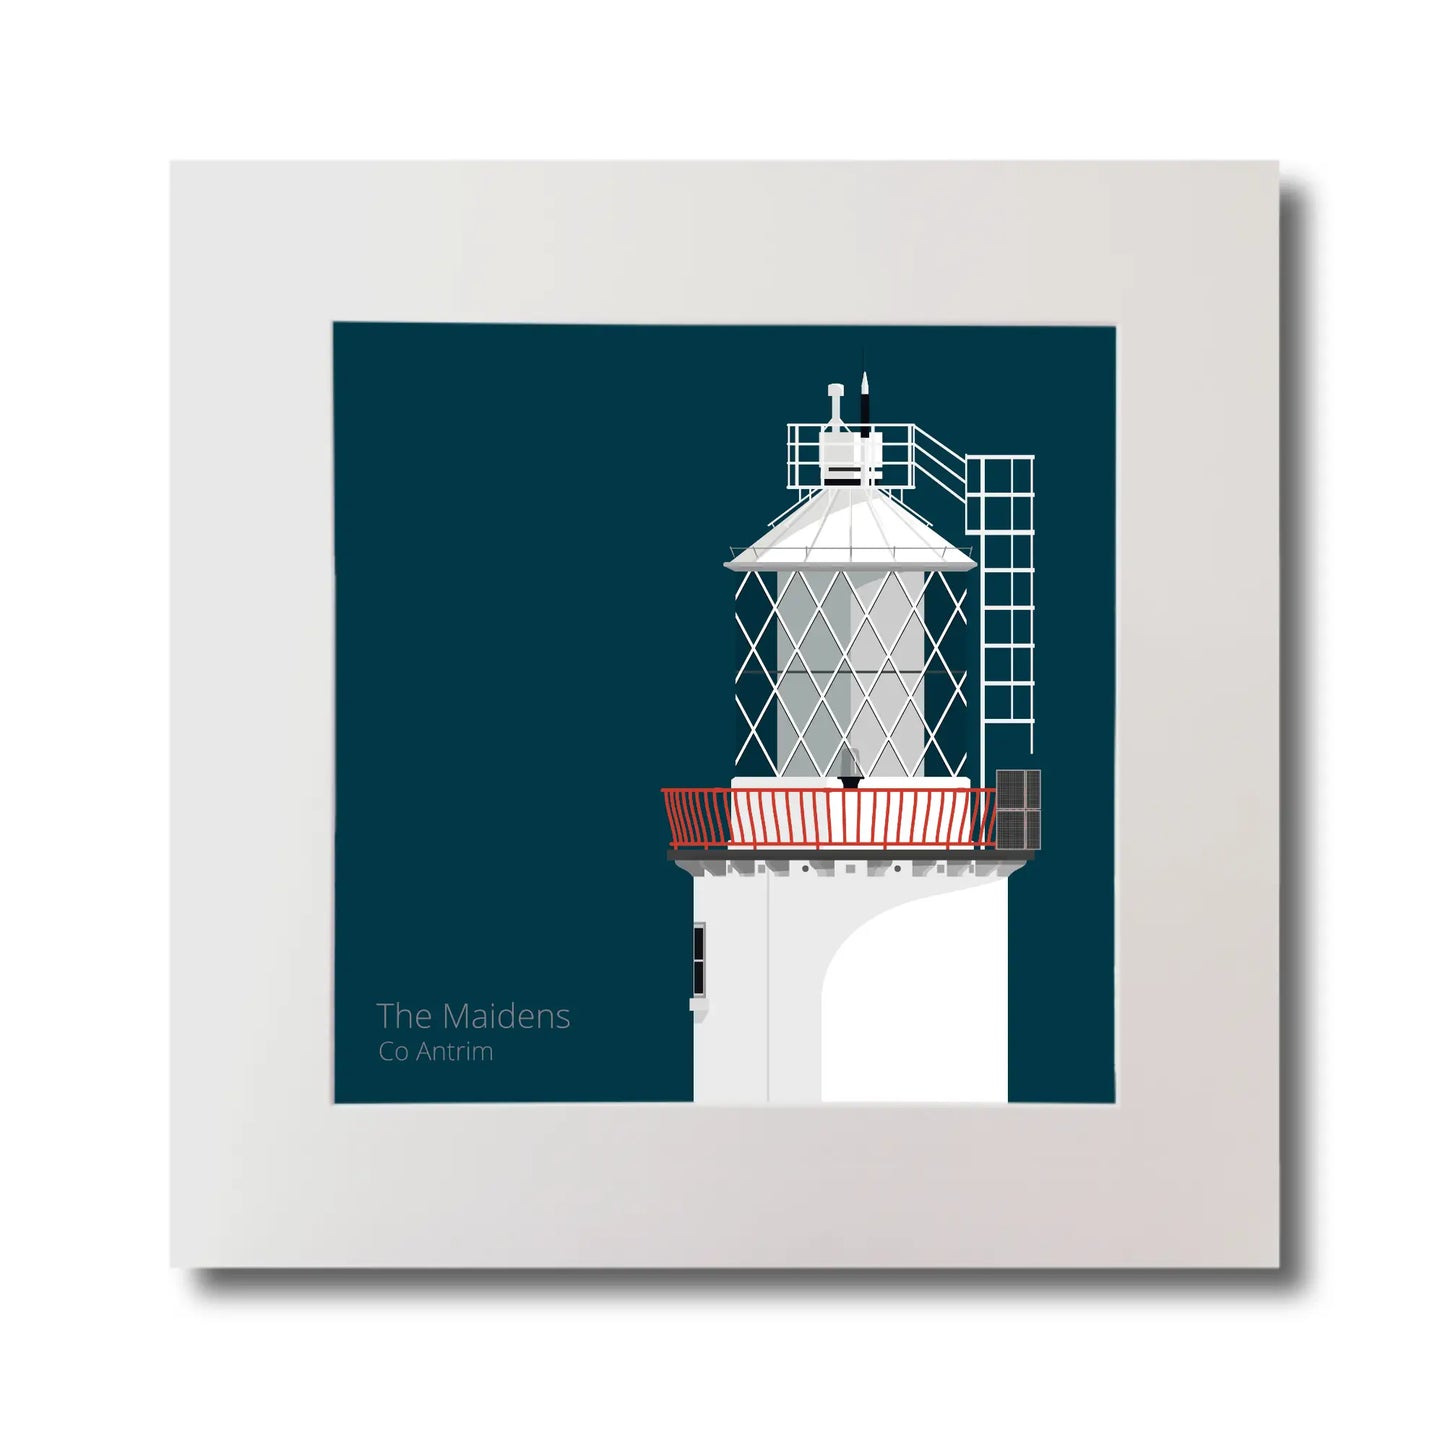 Illustration of The Maidens lighthouse on a midnight blue background, mounted and measuring 30x30cm.